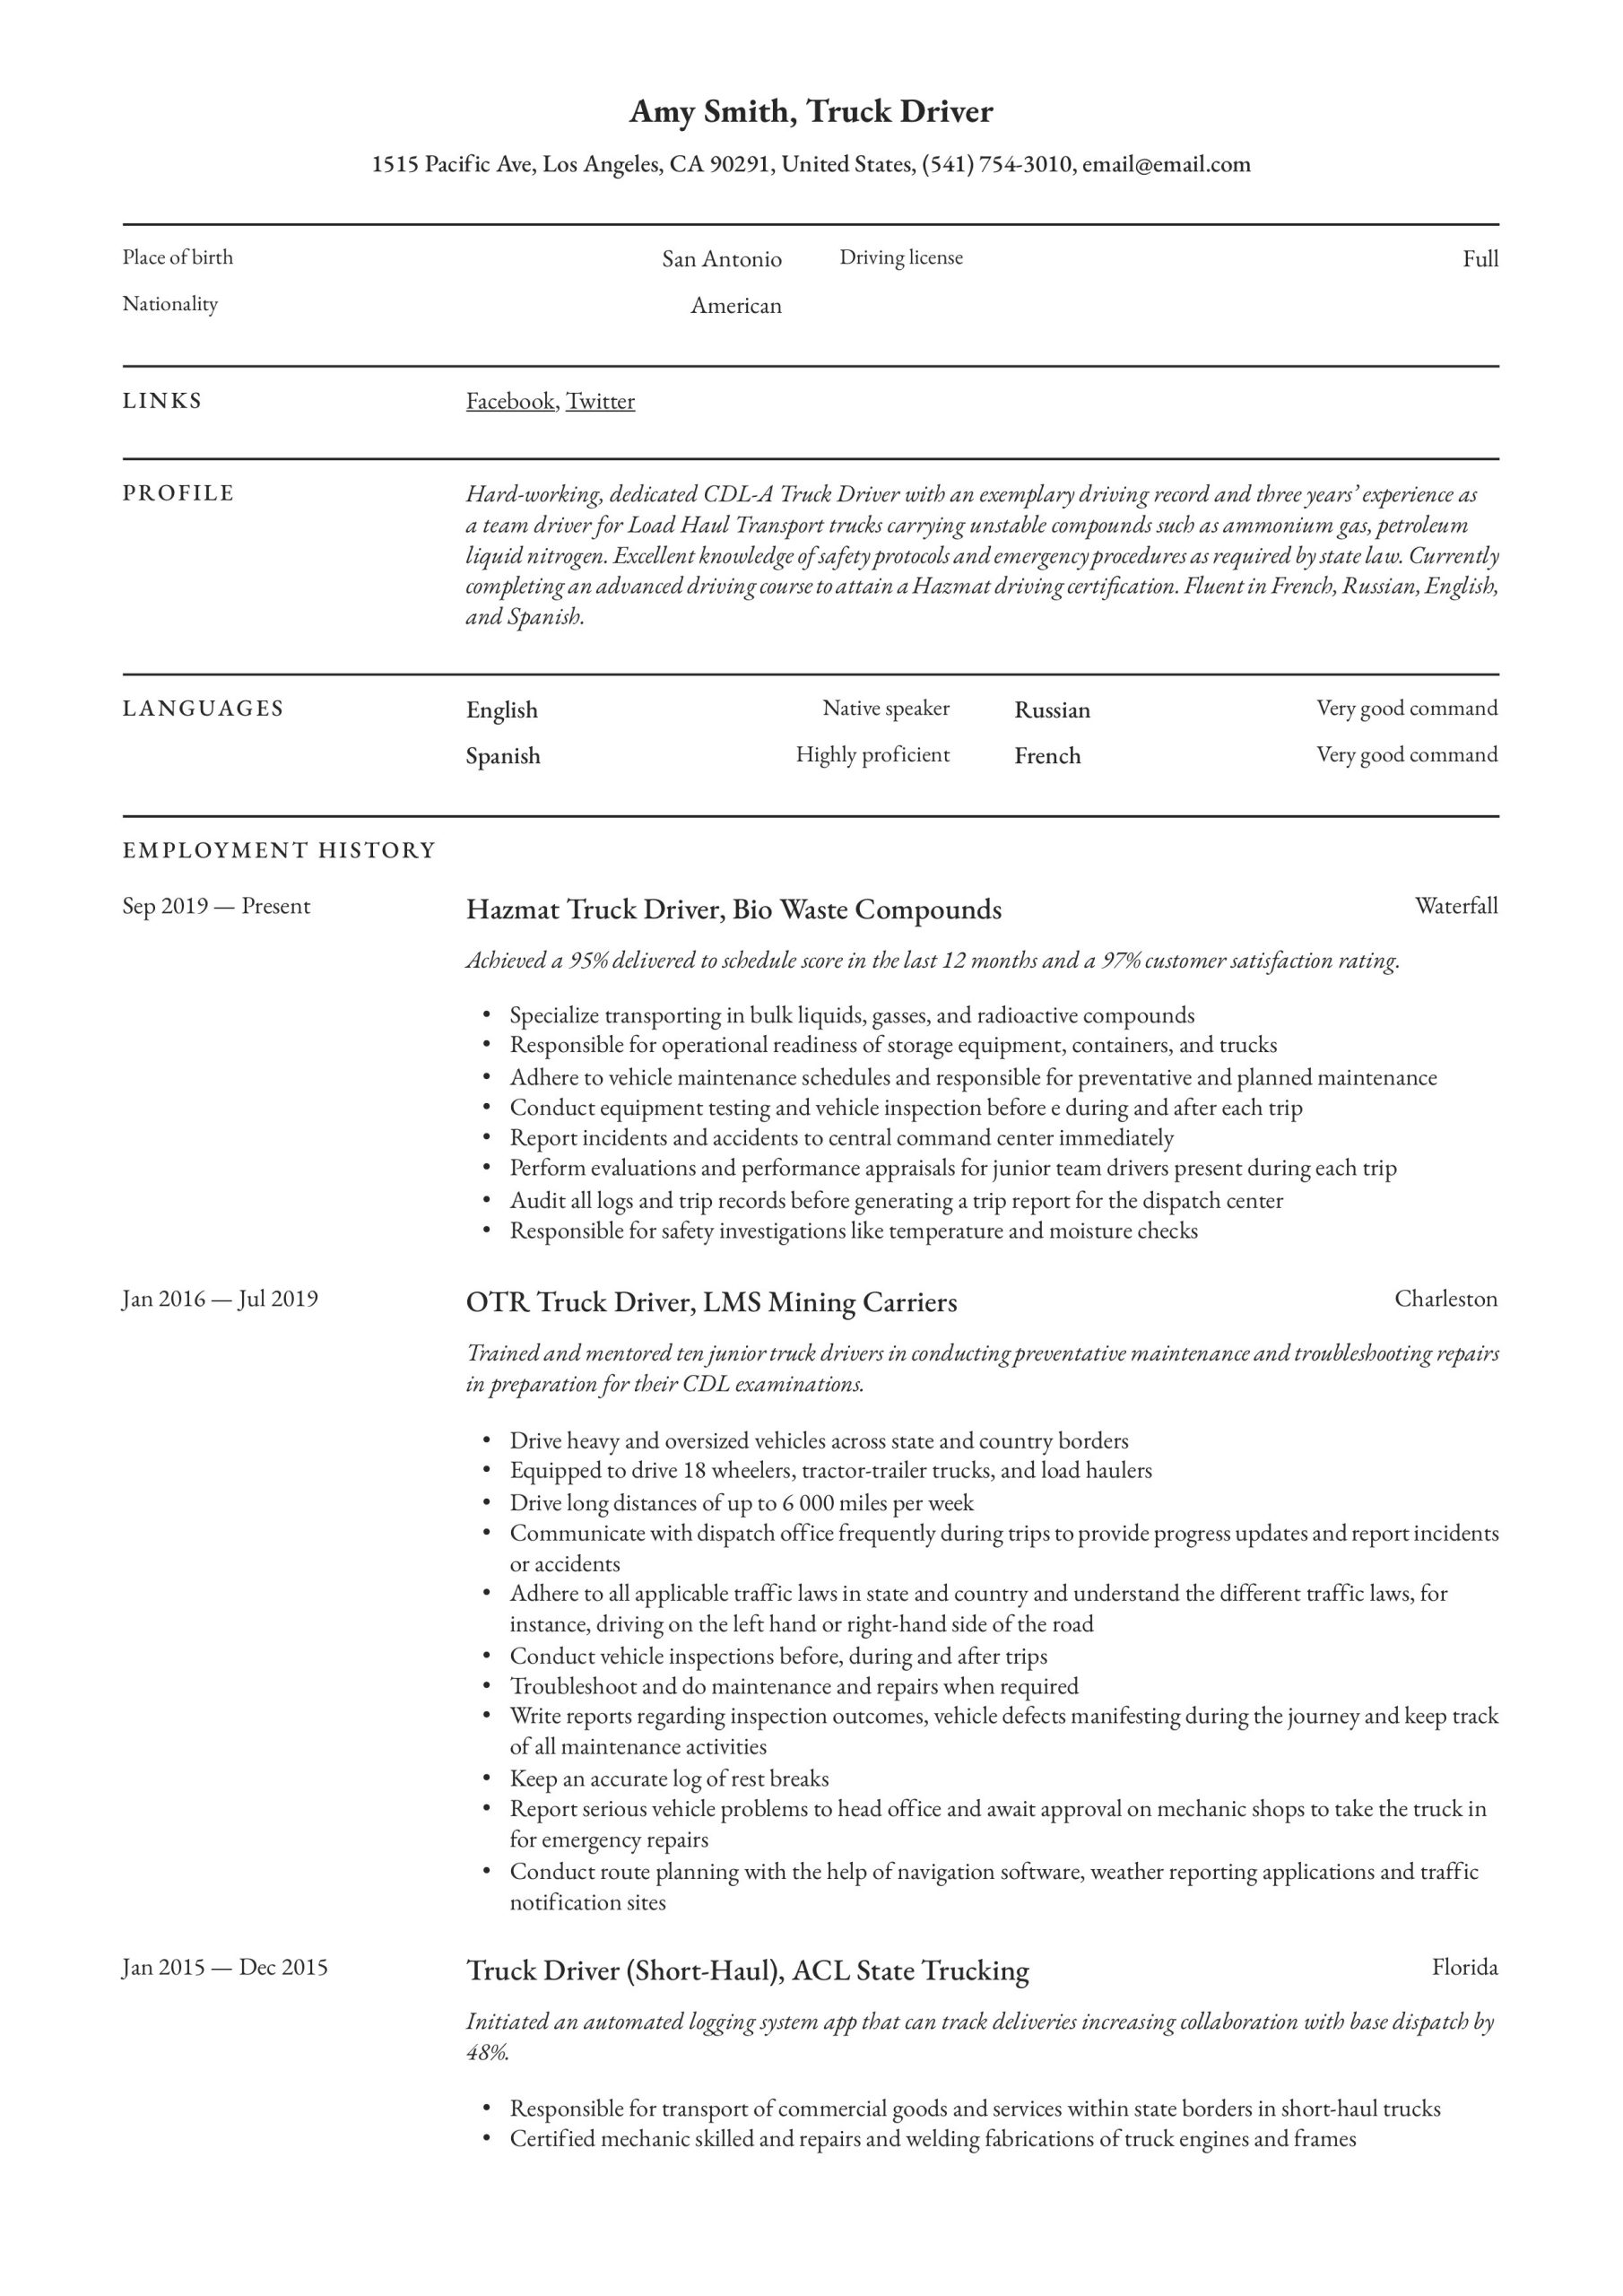 Truck Driver Resume Sample No Experience Truck Driver Resume & Writing Guide  12 Resume Examples 2019